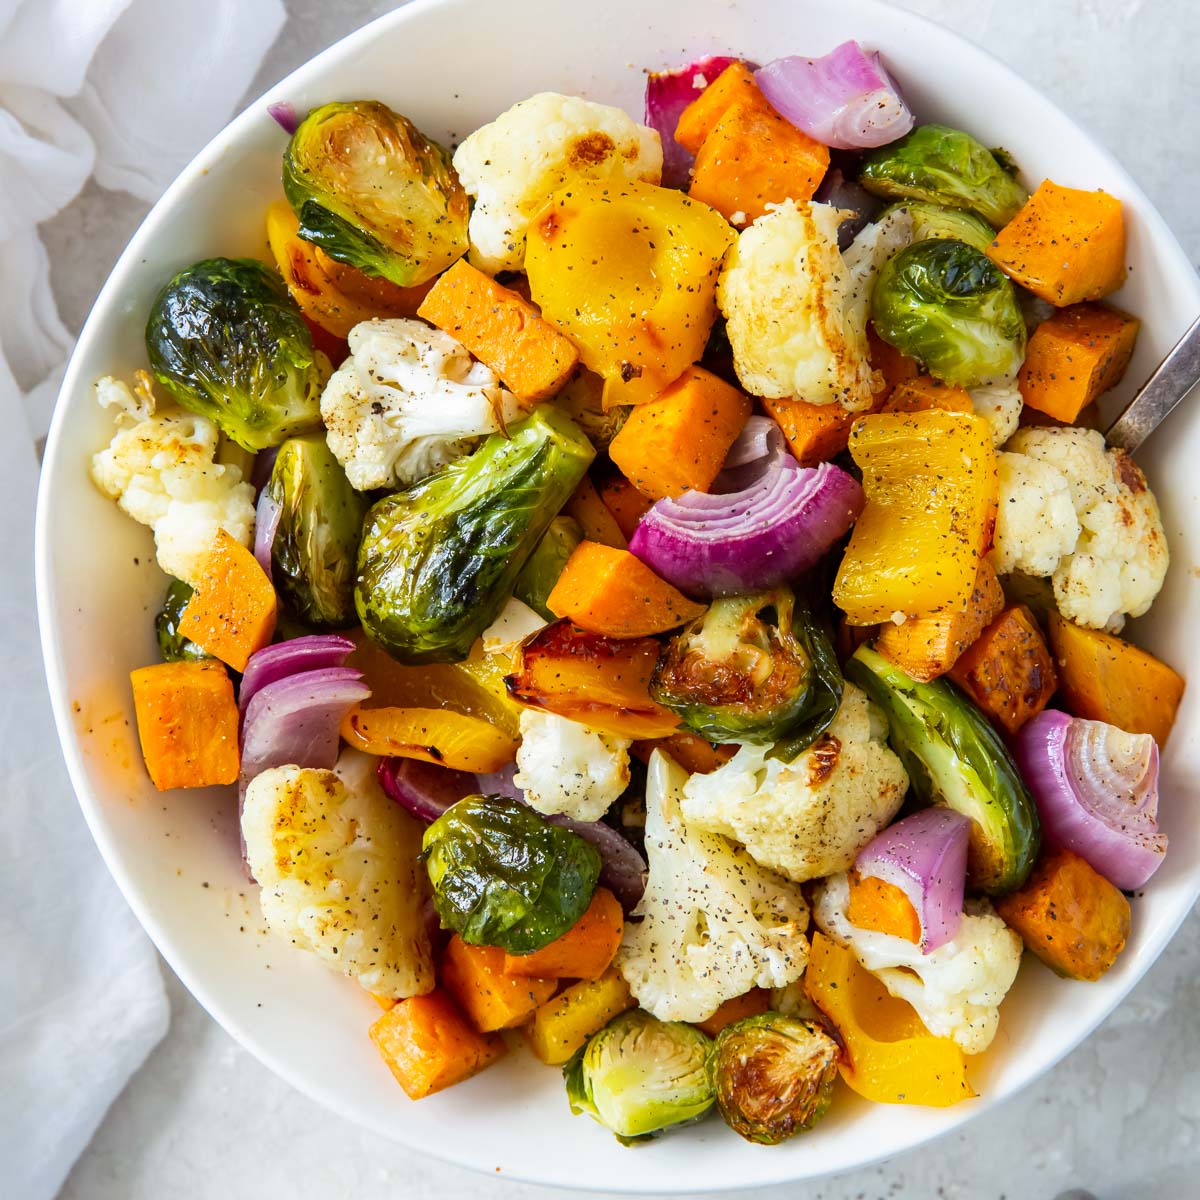 What Goes With Roasted Vegetables